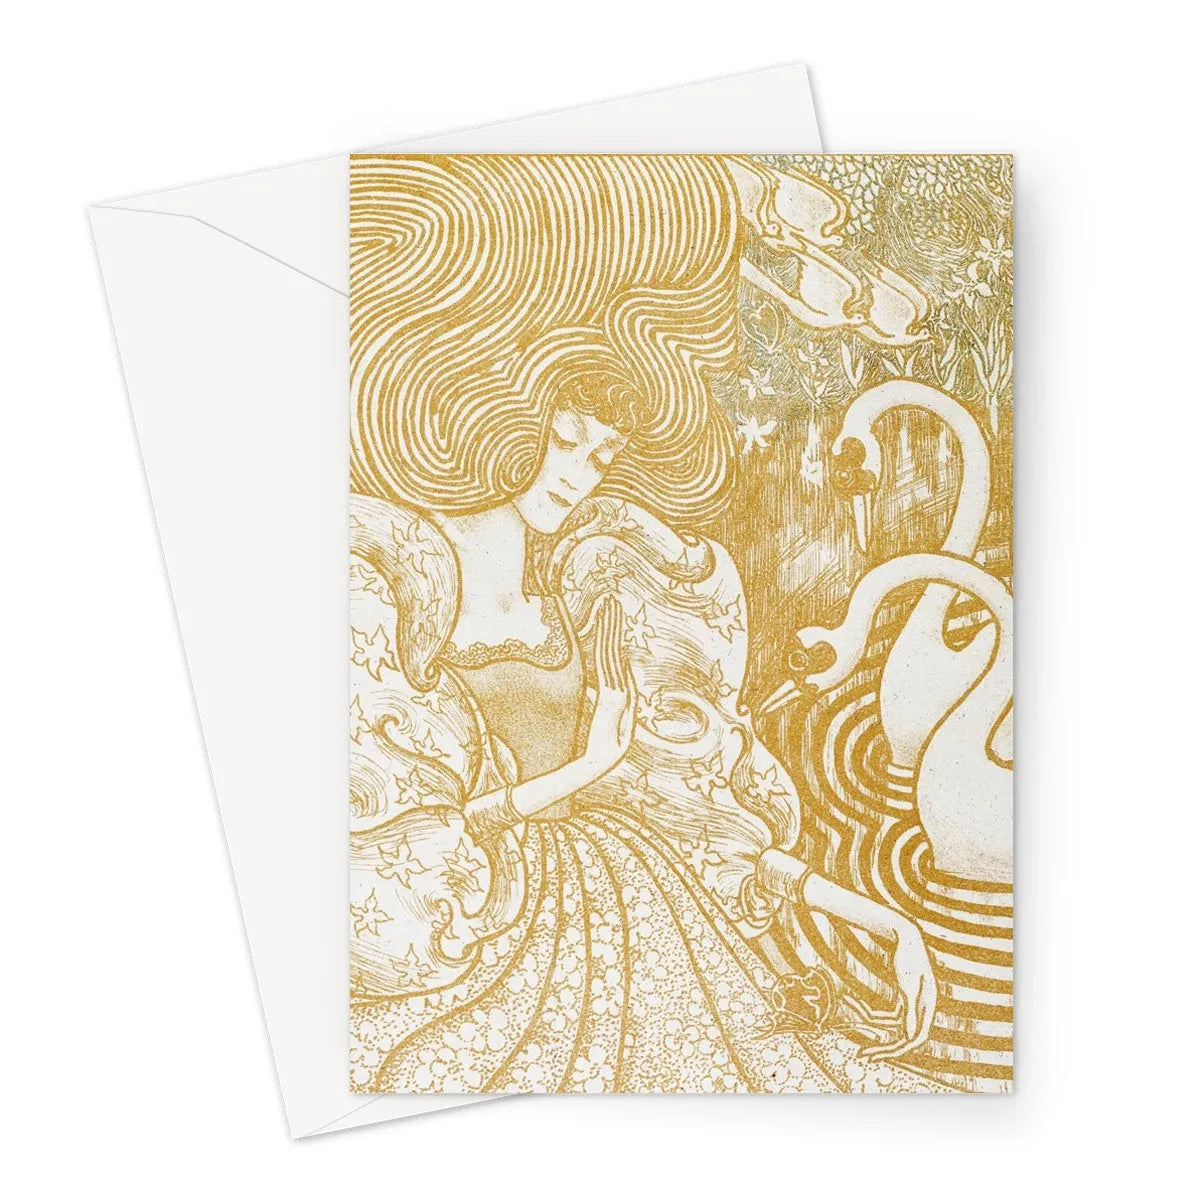 Woman With a Butterfly At a Pond With Two Swans By Jan Toorop Greeting Card - A5 Portrait / 1 Card - Greeting & Note